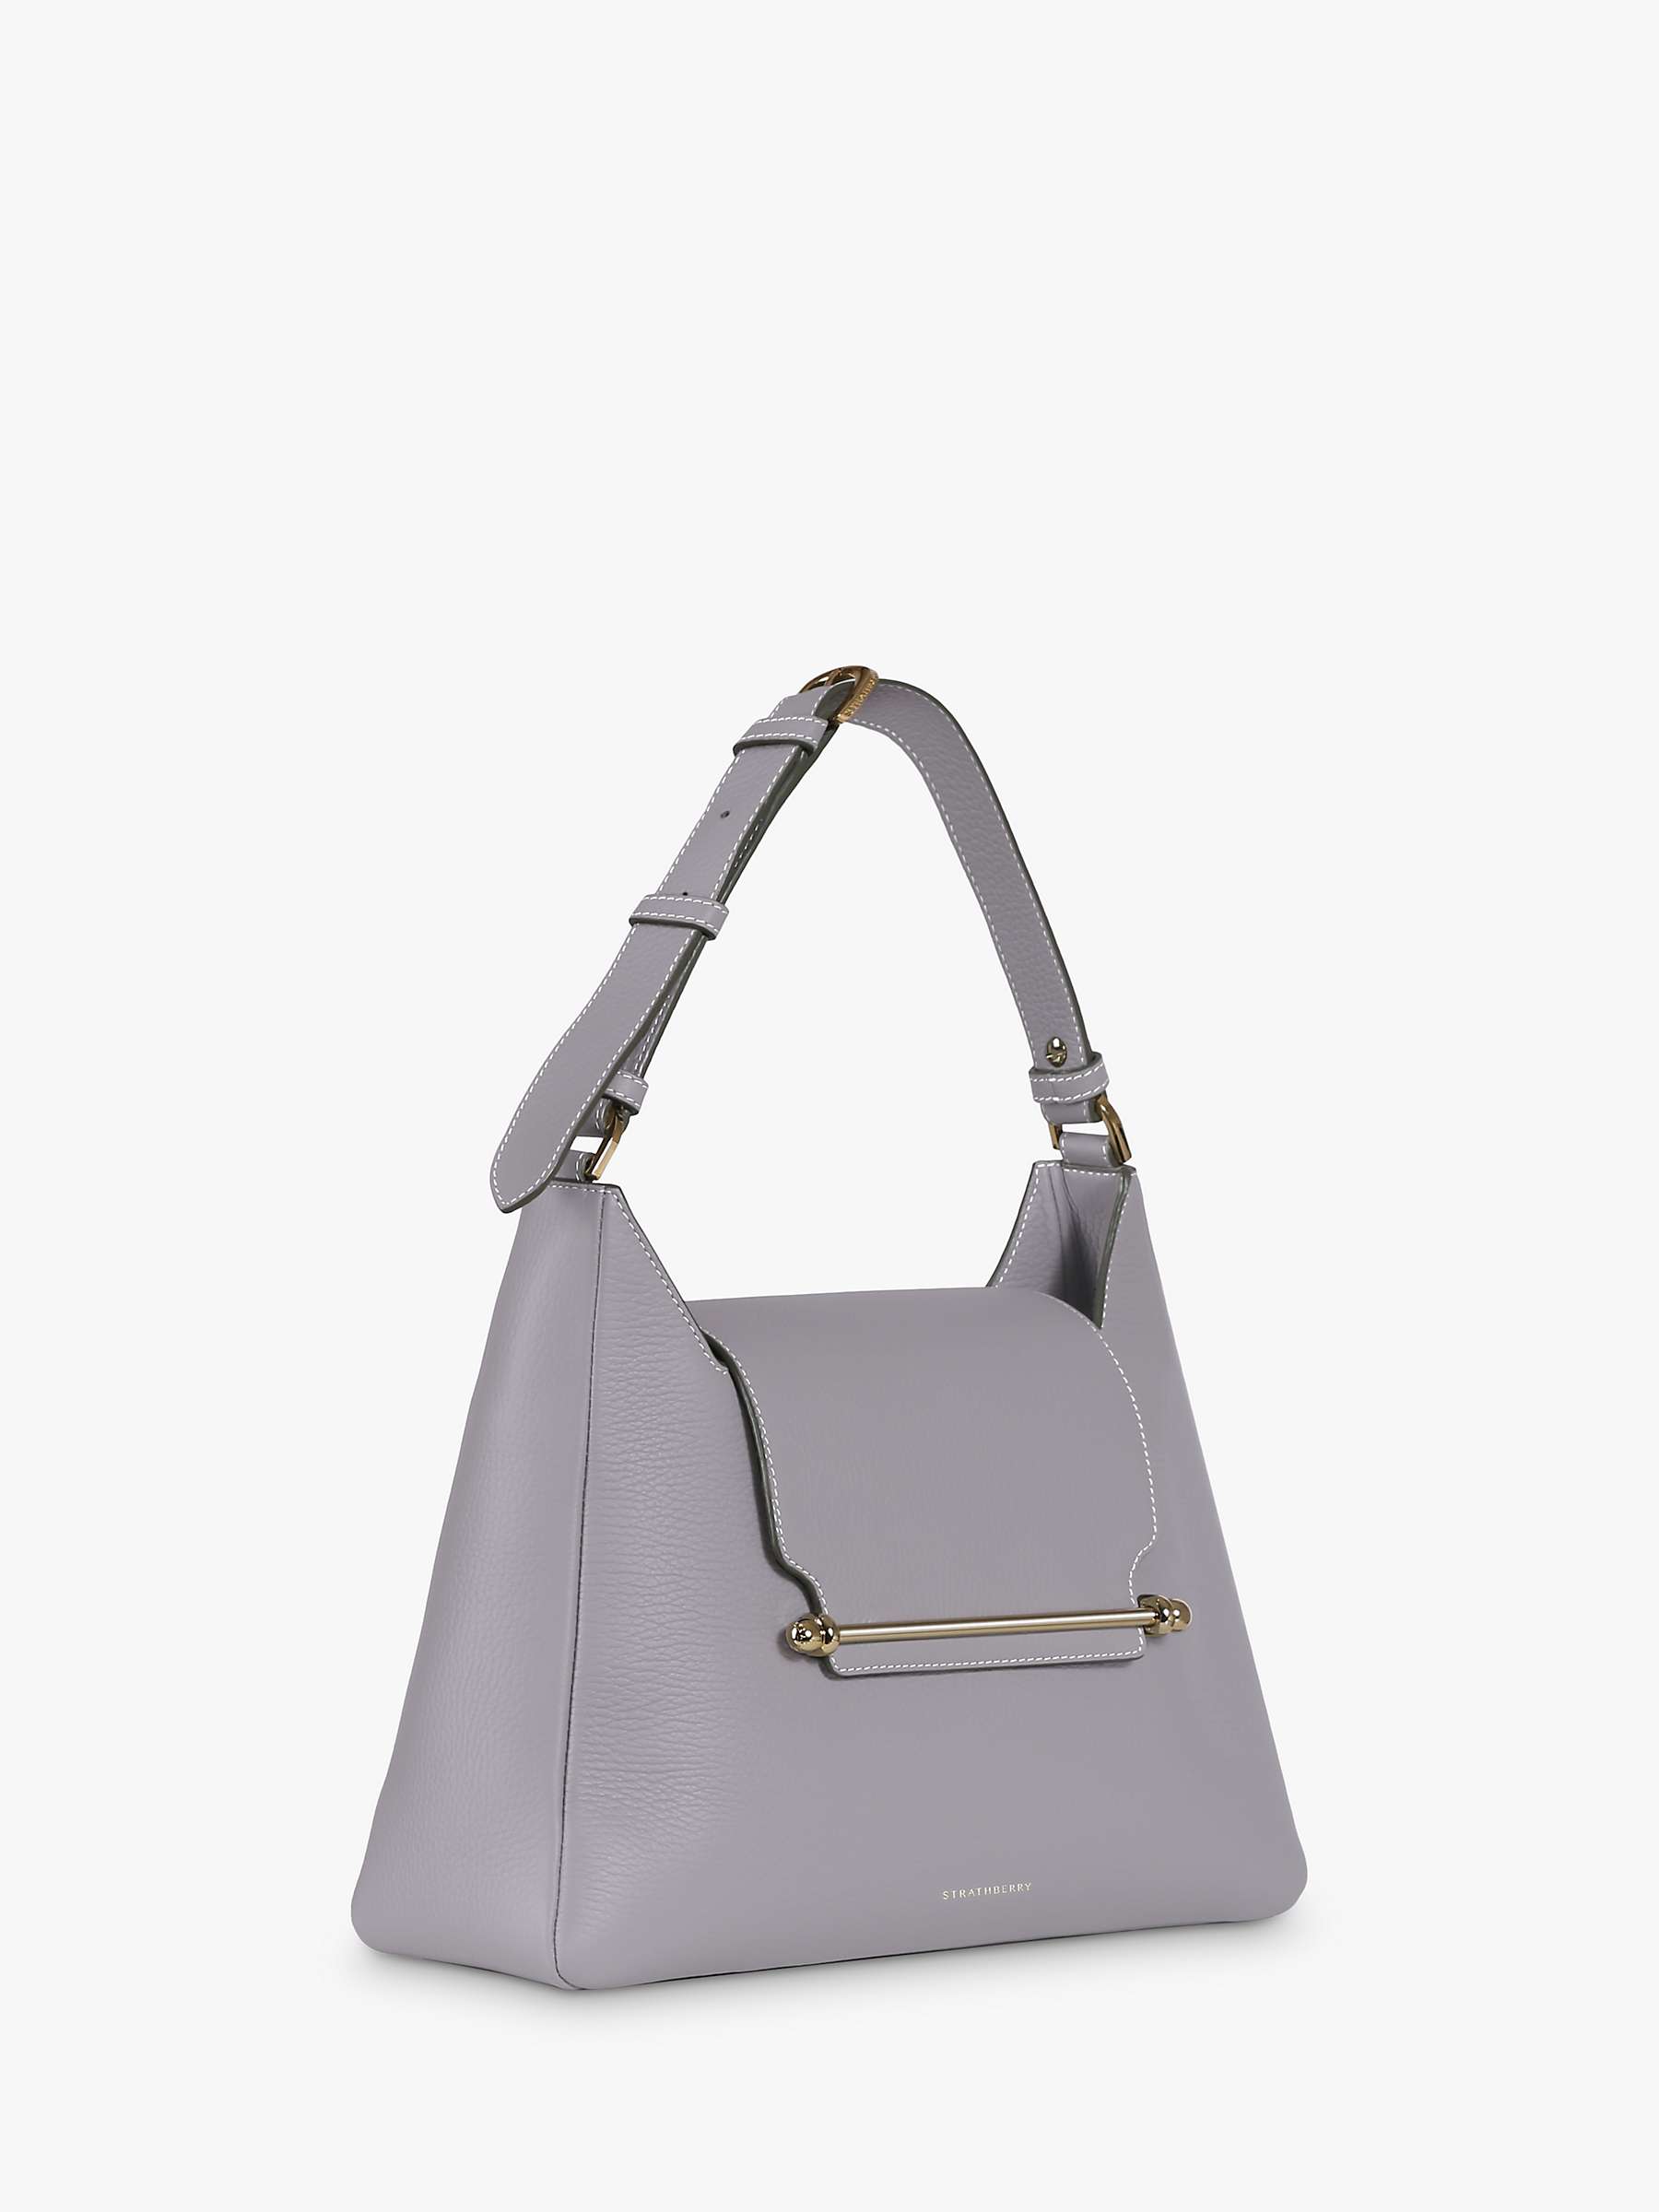 Strathberry Multrees Leather Hobo Bag, Frost Grey/Vanilla at John Lewis ...